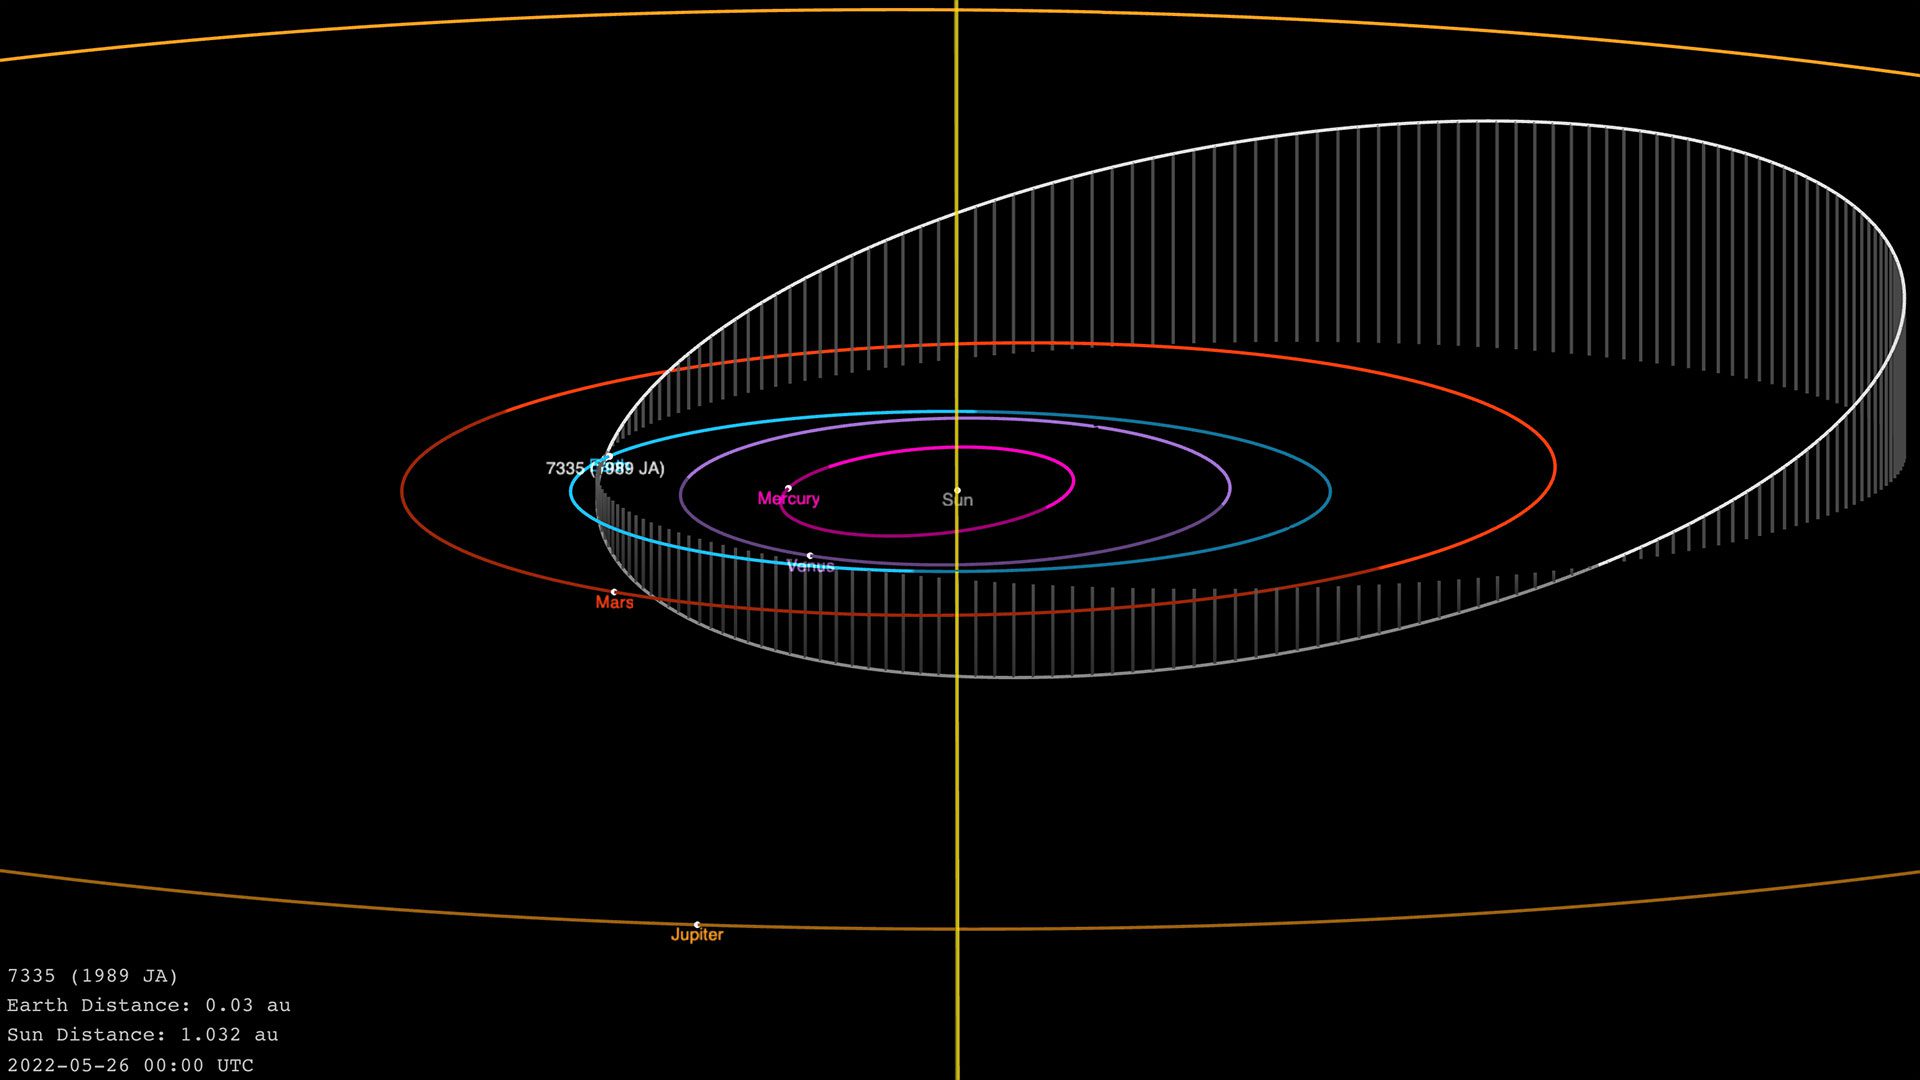 Screenshot of the NASA database used to locate small objects that can be found within kilometers that are part of Earth's orbit, showing 7335 (1989 JA).